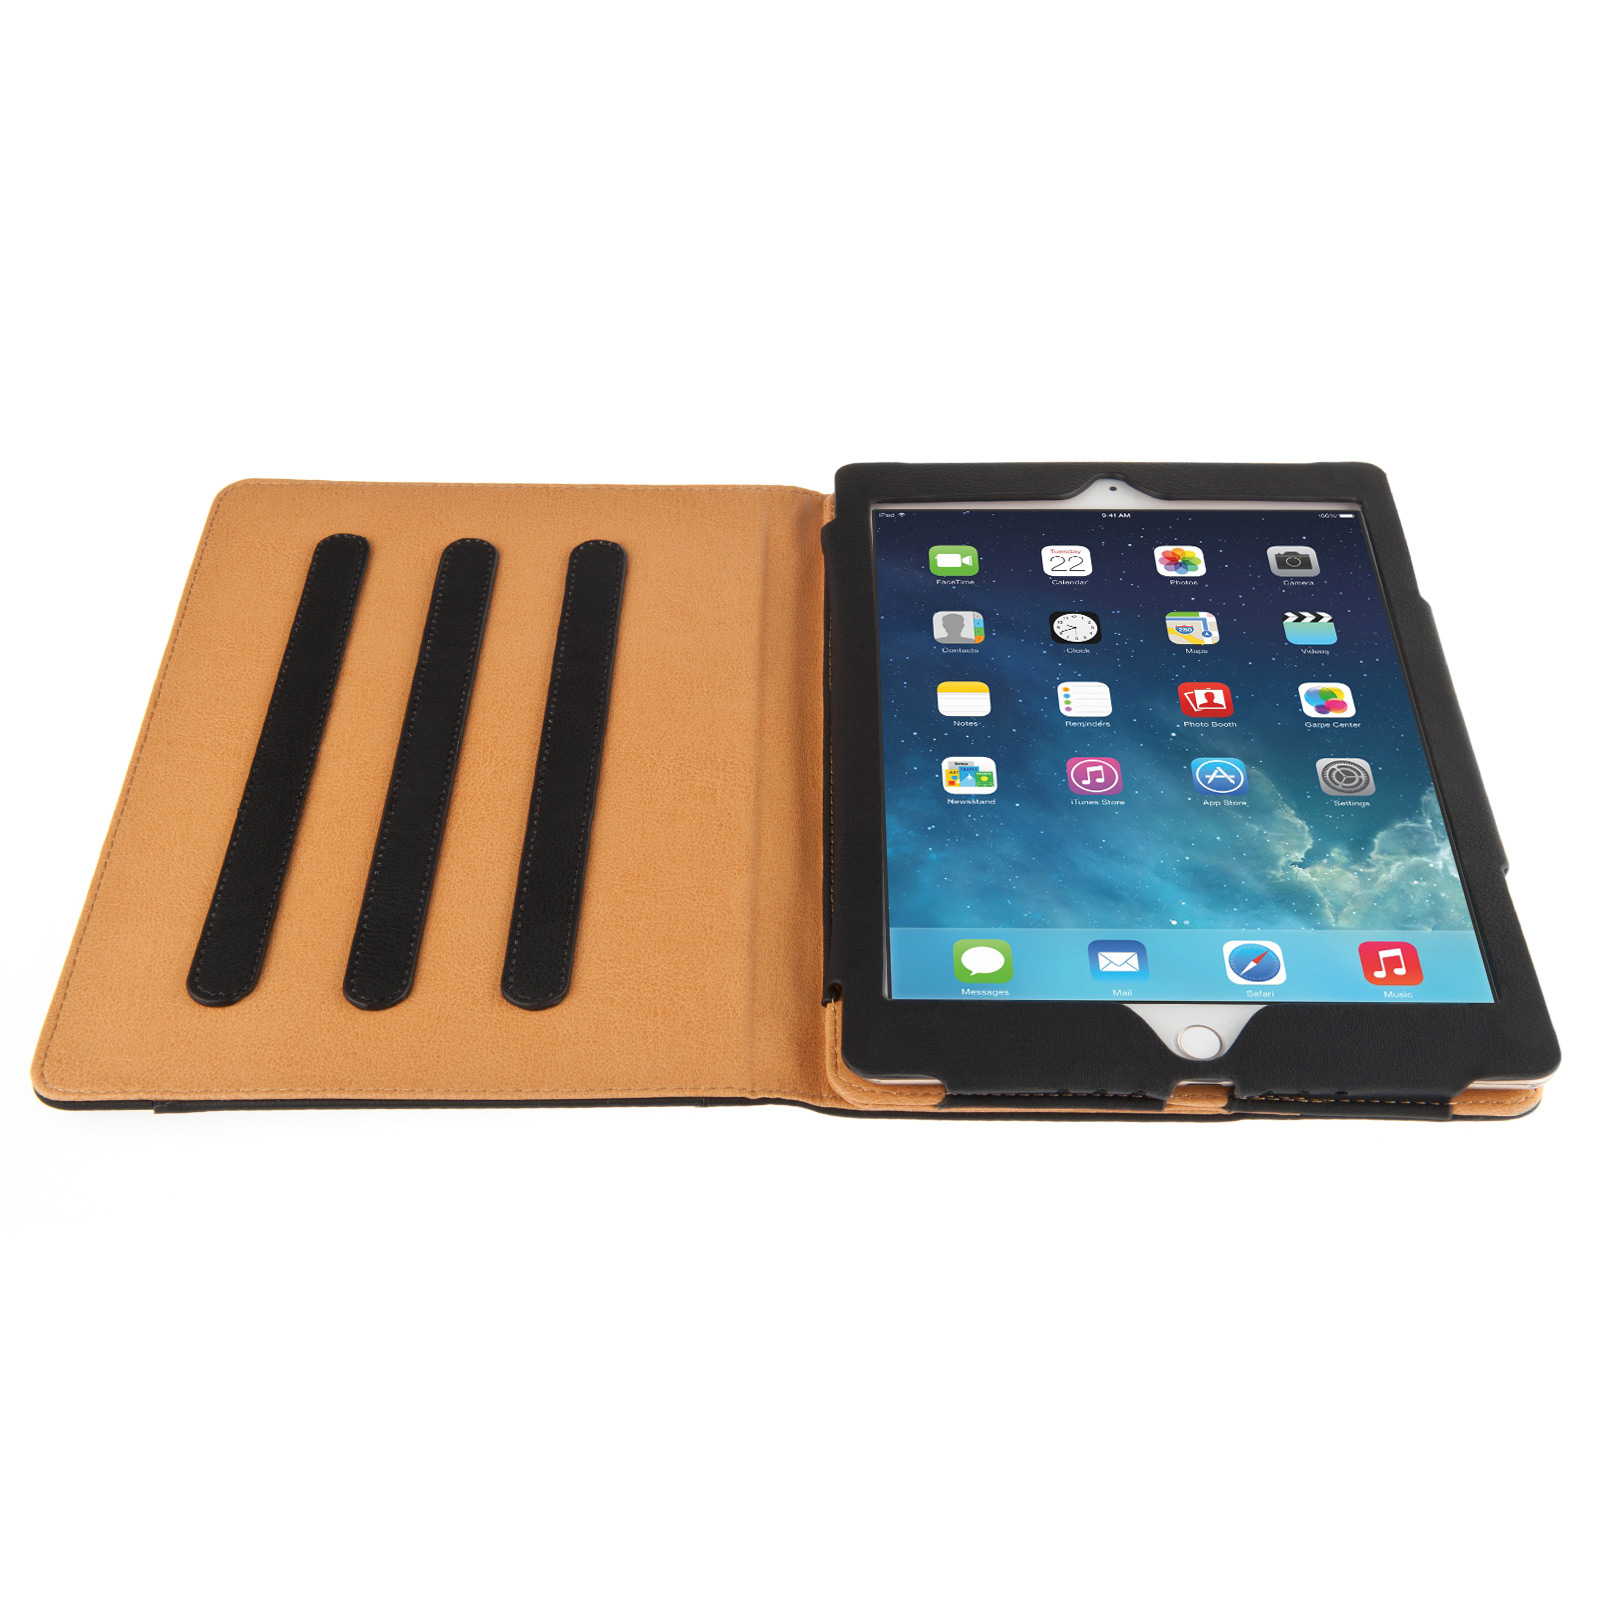 YouSave iPad Air 2 PU Leather Magnetic Closing Stand Cover – Black with Tan Lining 